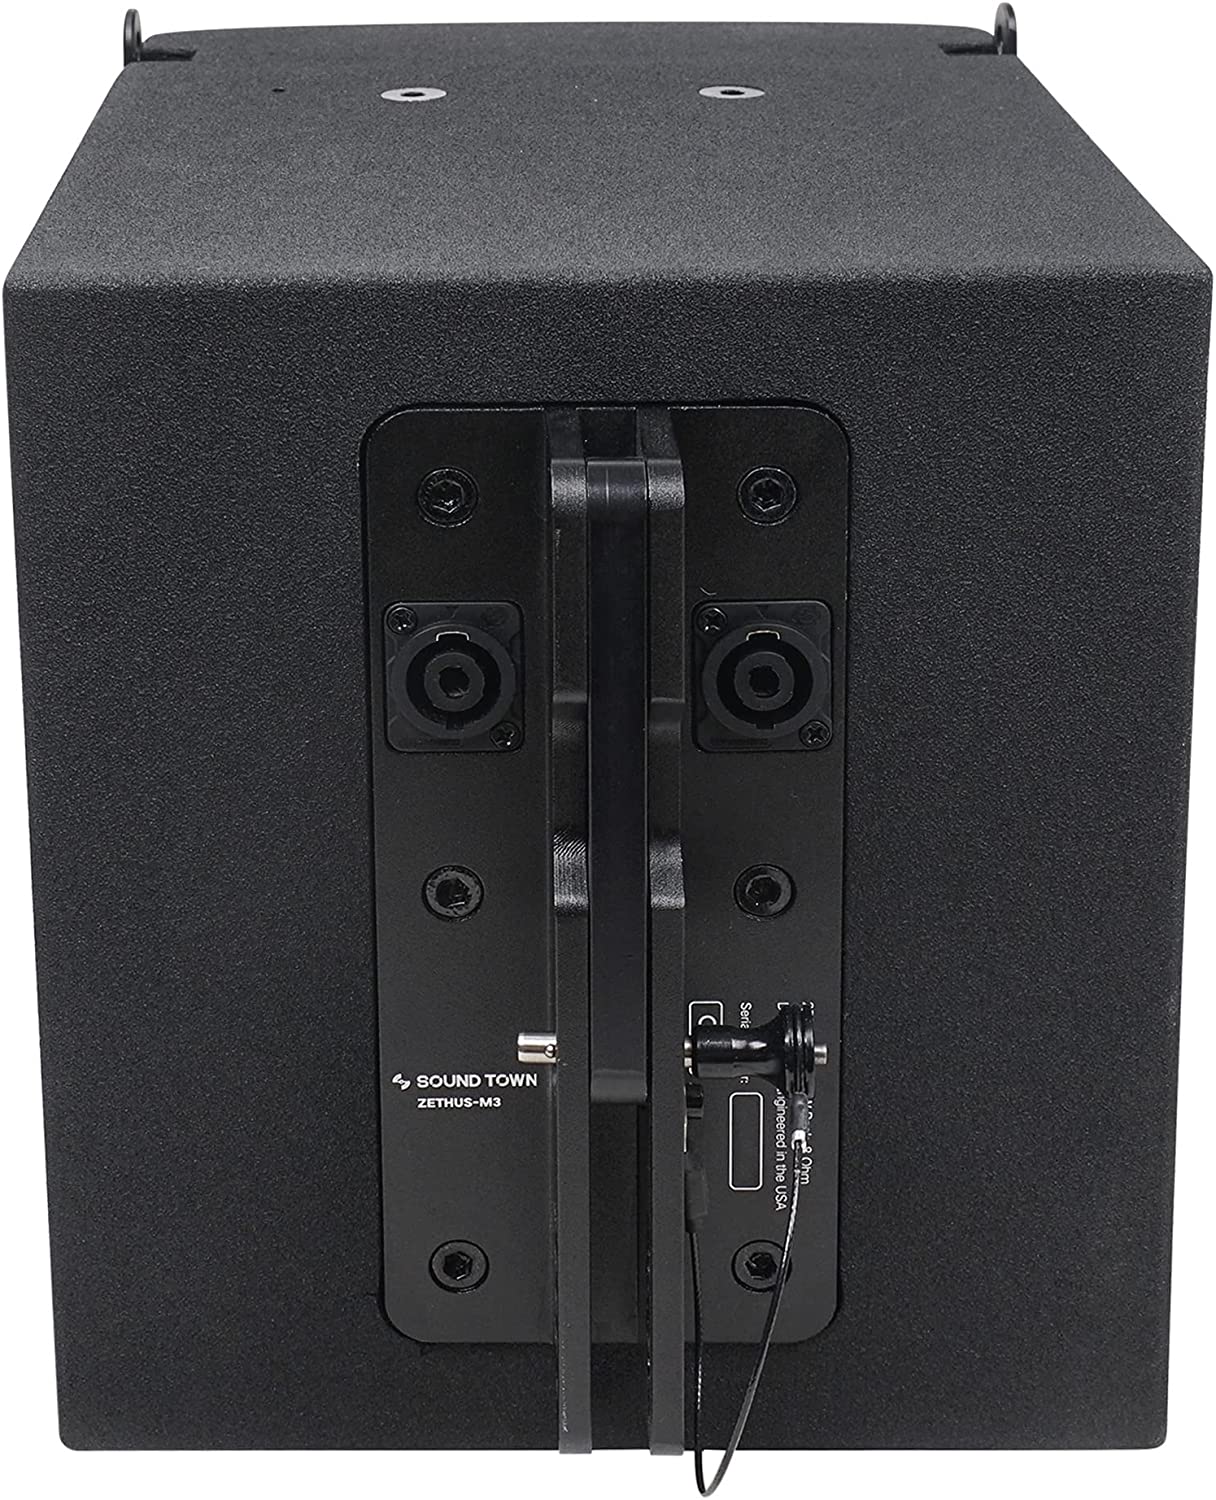 Sound Town Line Array Speaker System with One 18" Powered Subwoofer w/DSP and Speaker Output, Two 6 x 3 Line Array Speakers, Black (CARME-18M3) - image 3 of 9